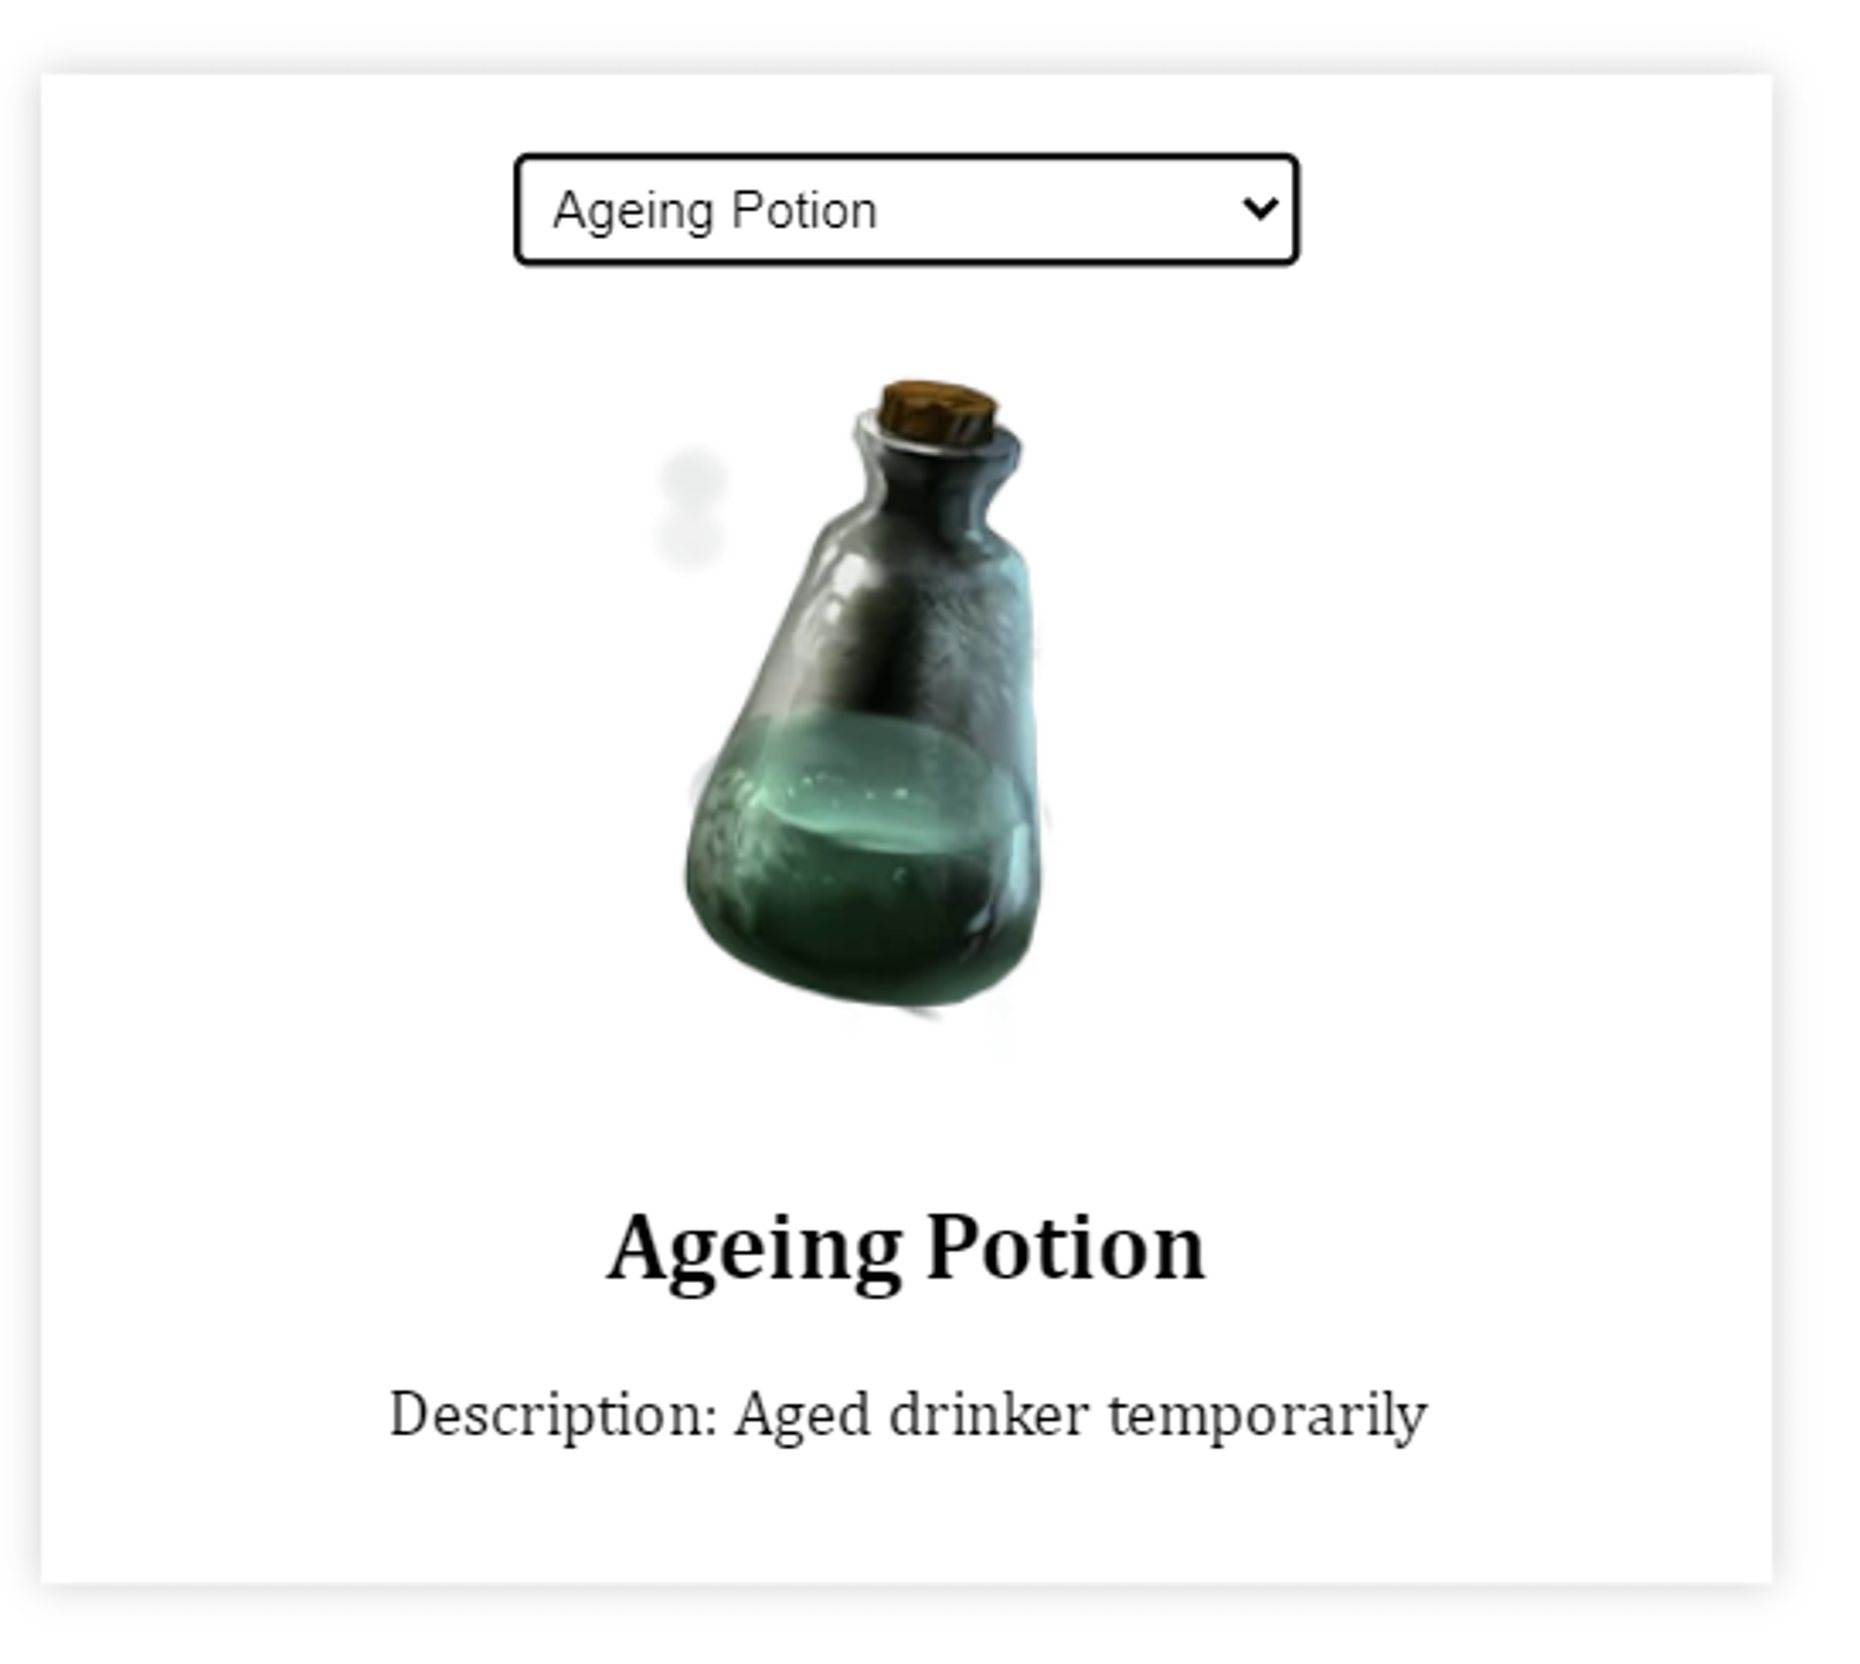 Ageing potion